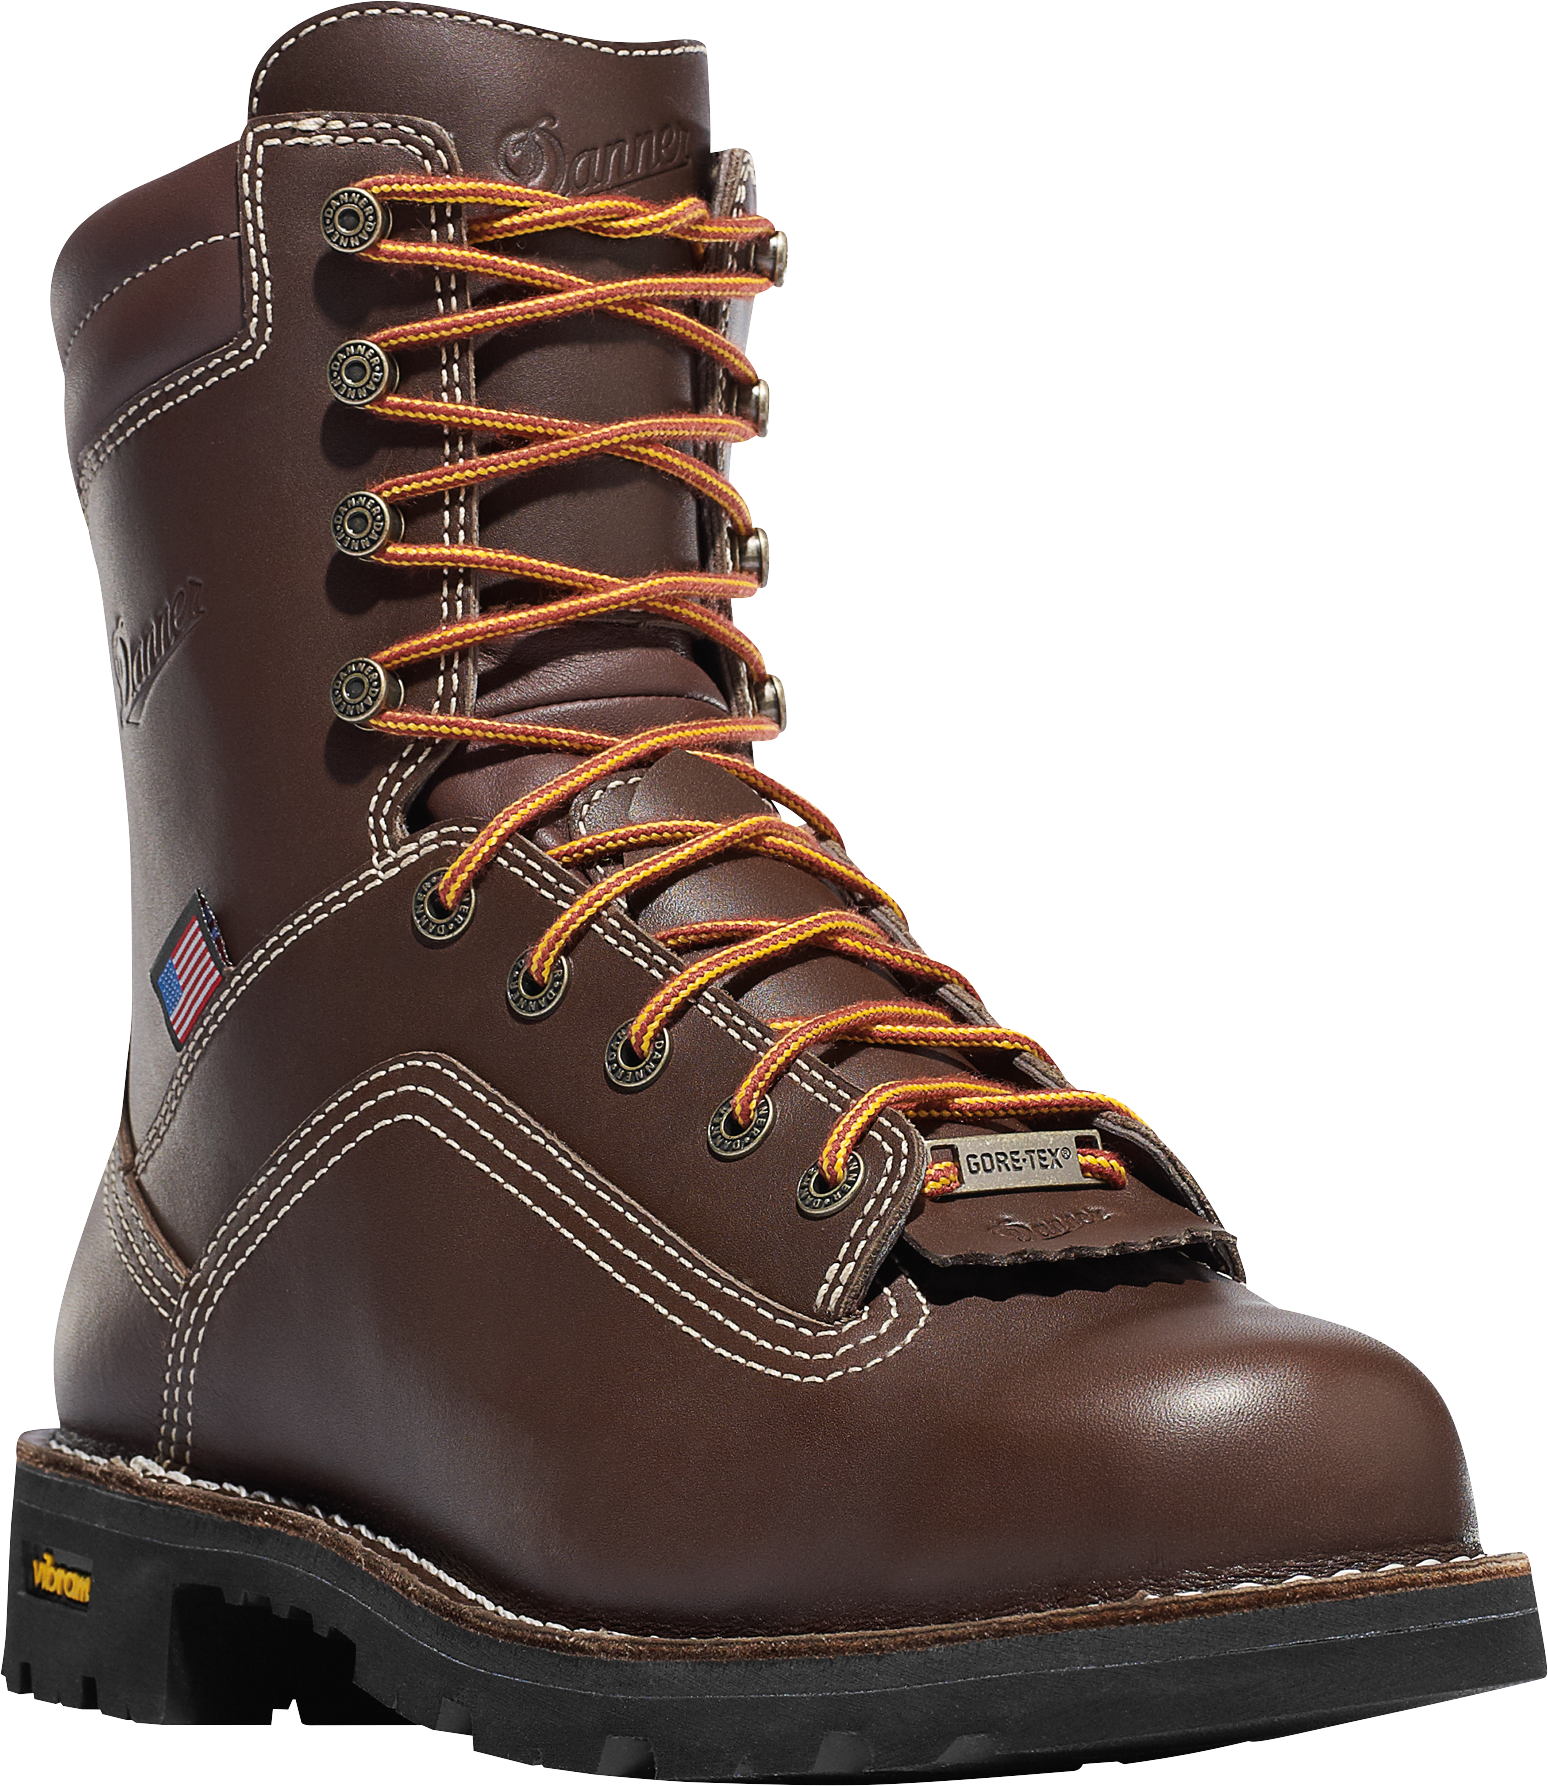 Danner Quarry USA Brown GORE-TEX Alloy Toe Work Boots for Men - Brown - 9.5M